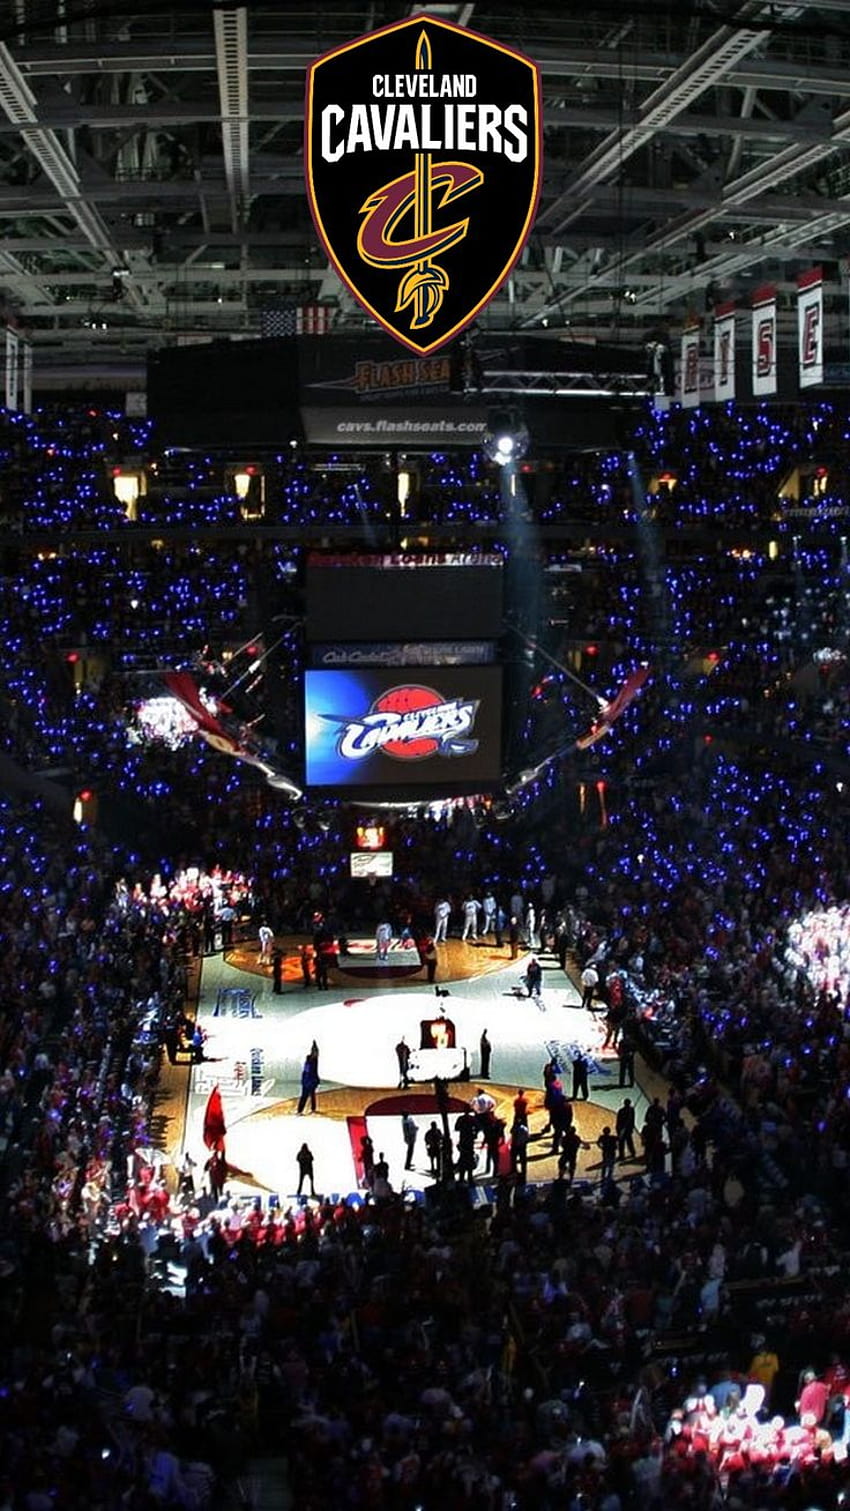 Cleveland Cavaliers NBA iPhone 6, basketball arena HD phone wallpaper